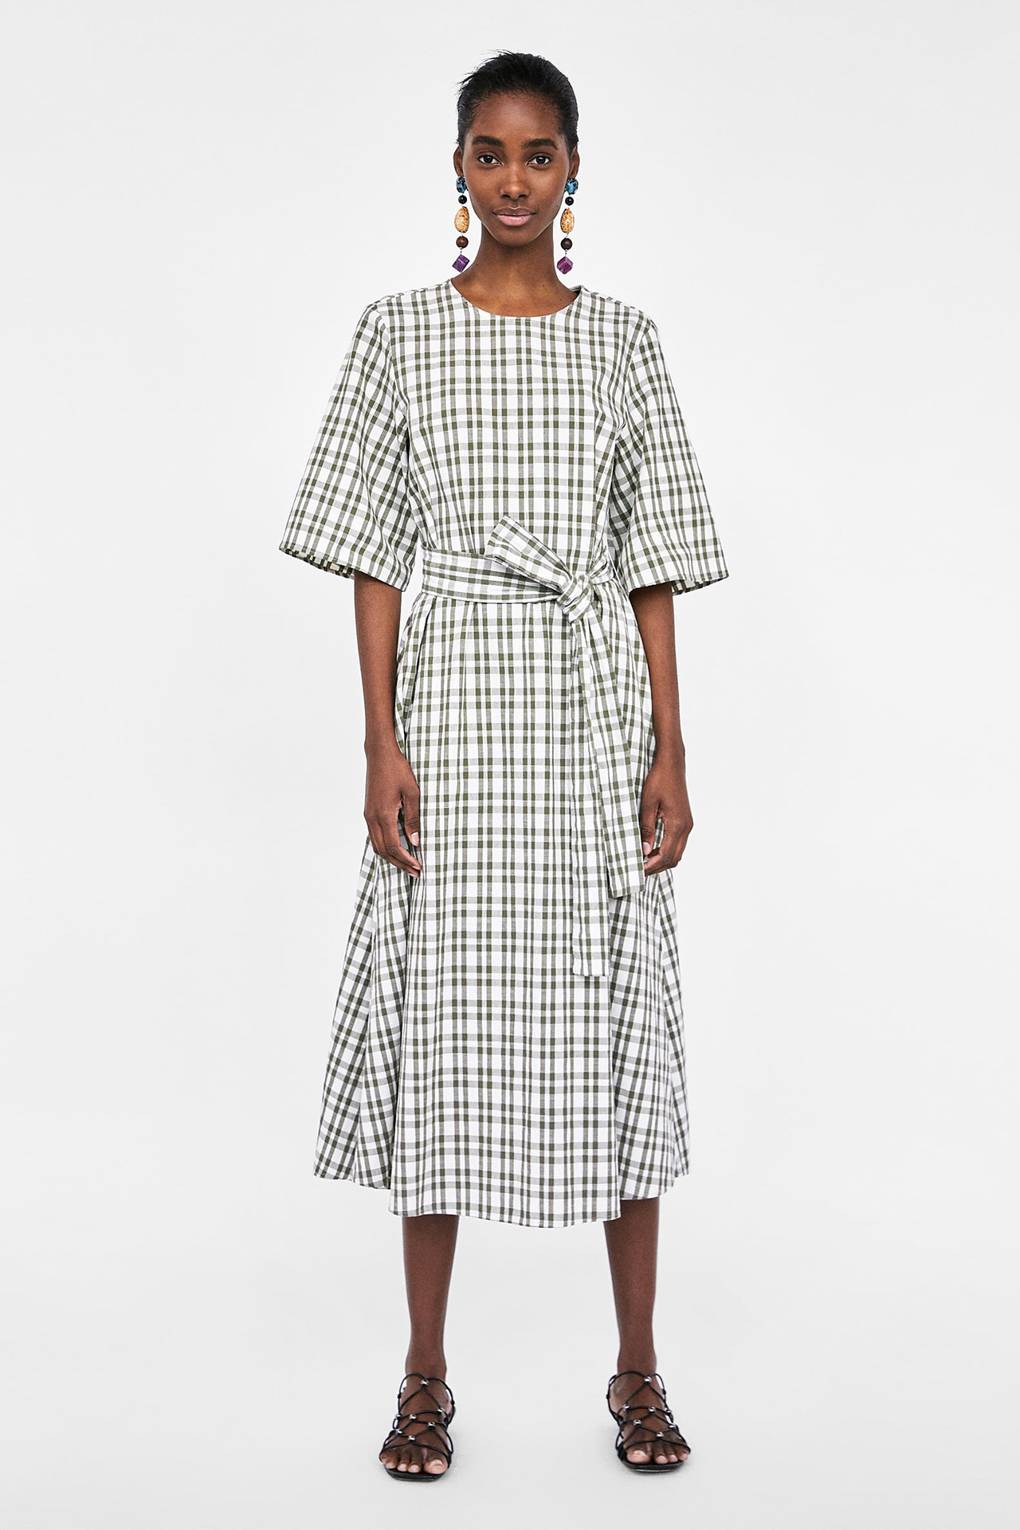 Zara's £40 Summer Dress Is Selling Out Fast | Glamour UK